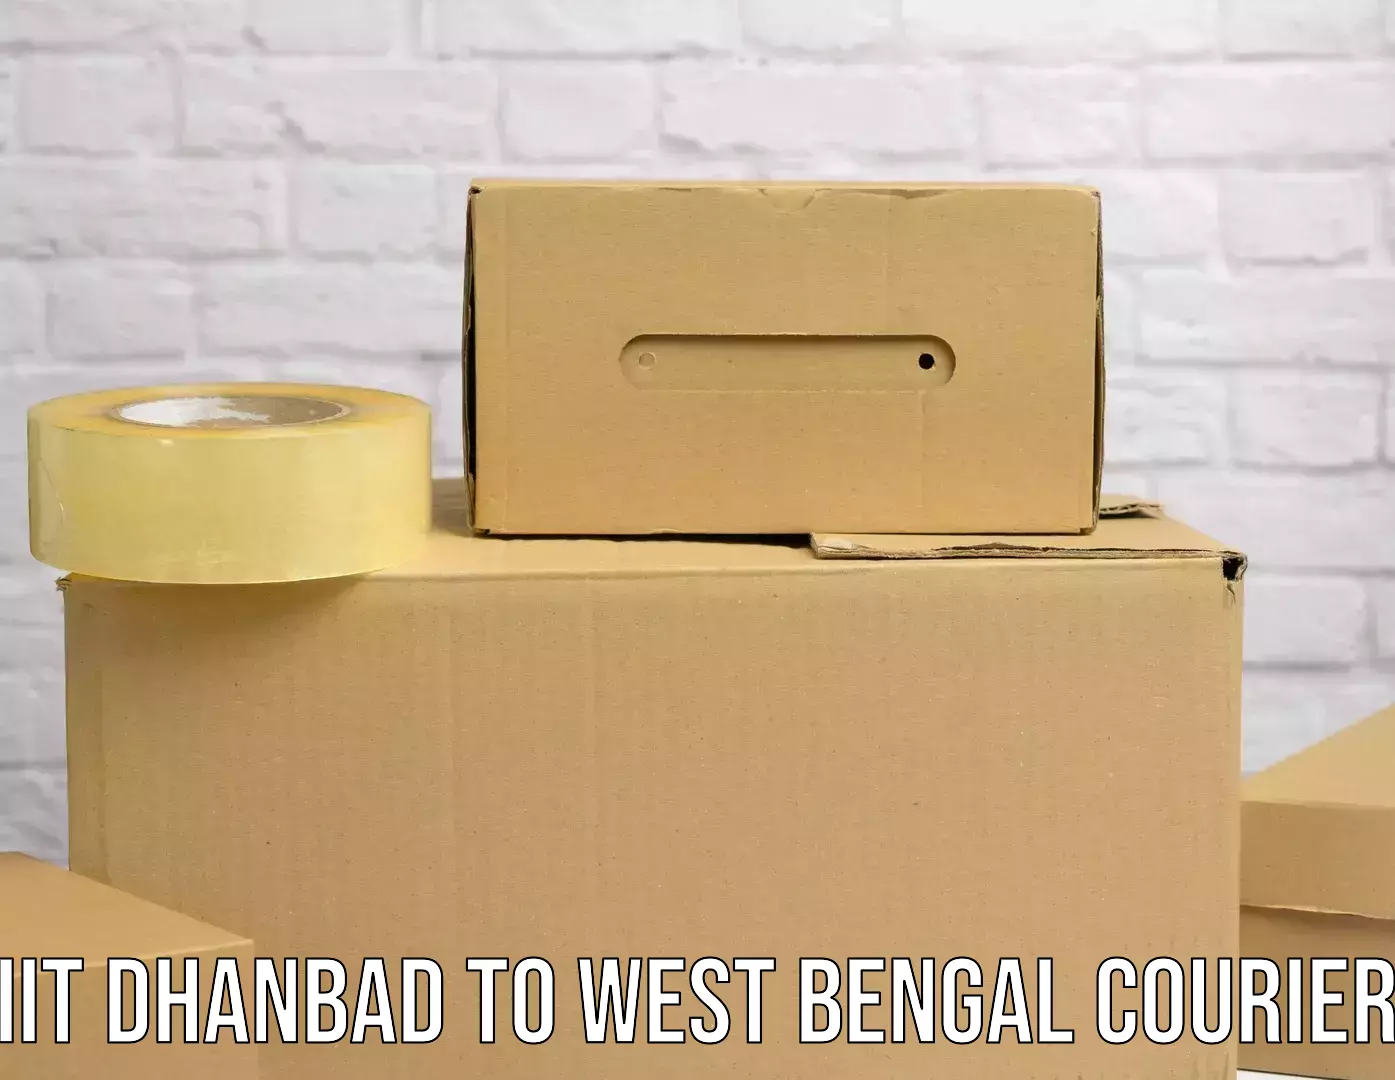 Express delivery network in IIT Dhanbad to West Bengal